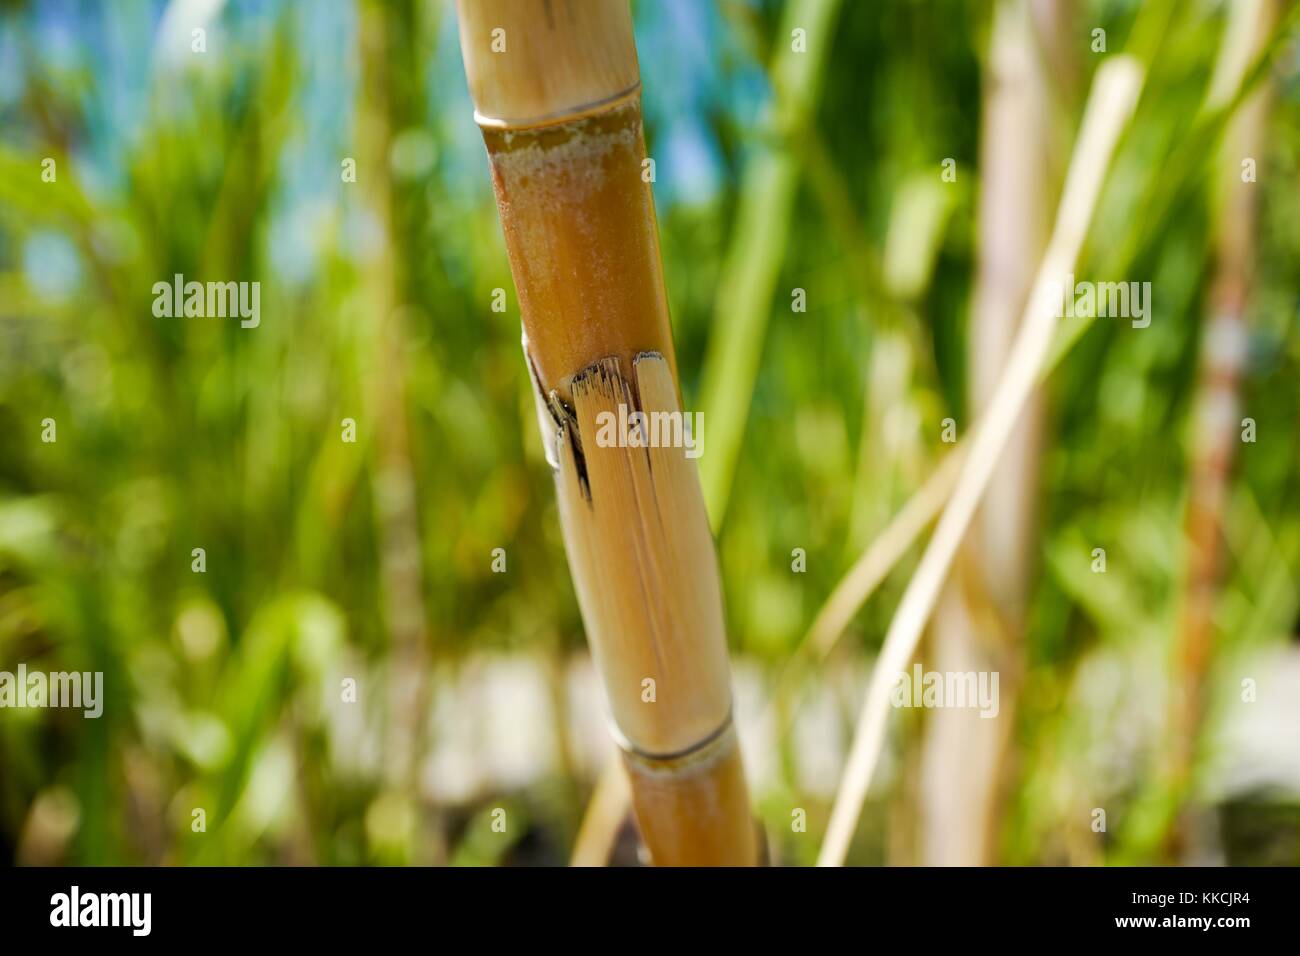 Close-up of the stalk of a sugarcane (Saccharum officinarum) plant, on a sunny day, growing in Maui, Hawaii, 2016. Stock Photo